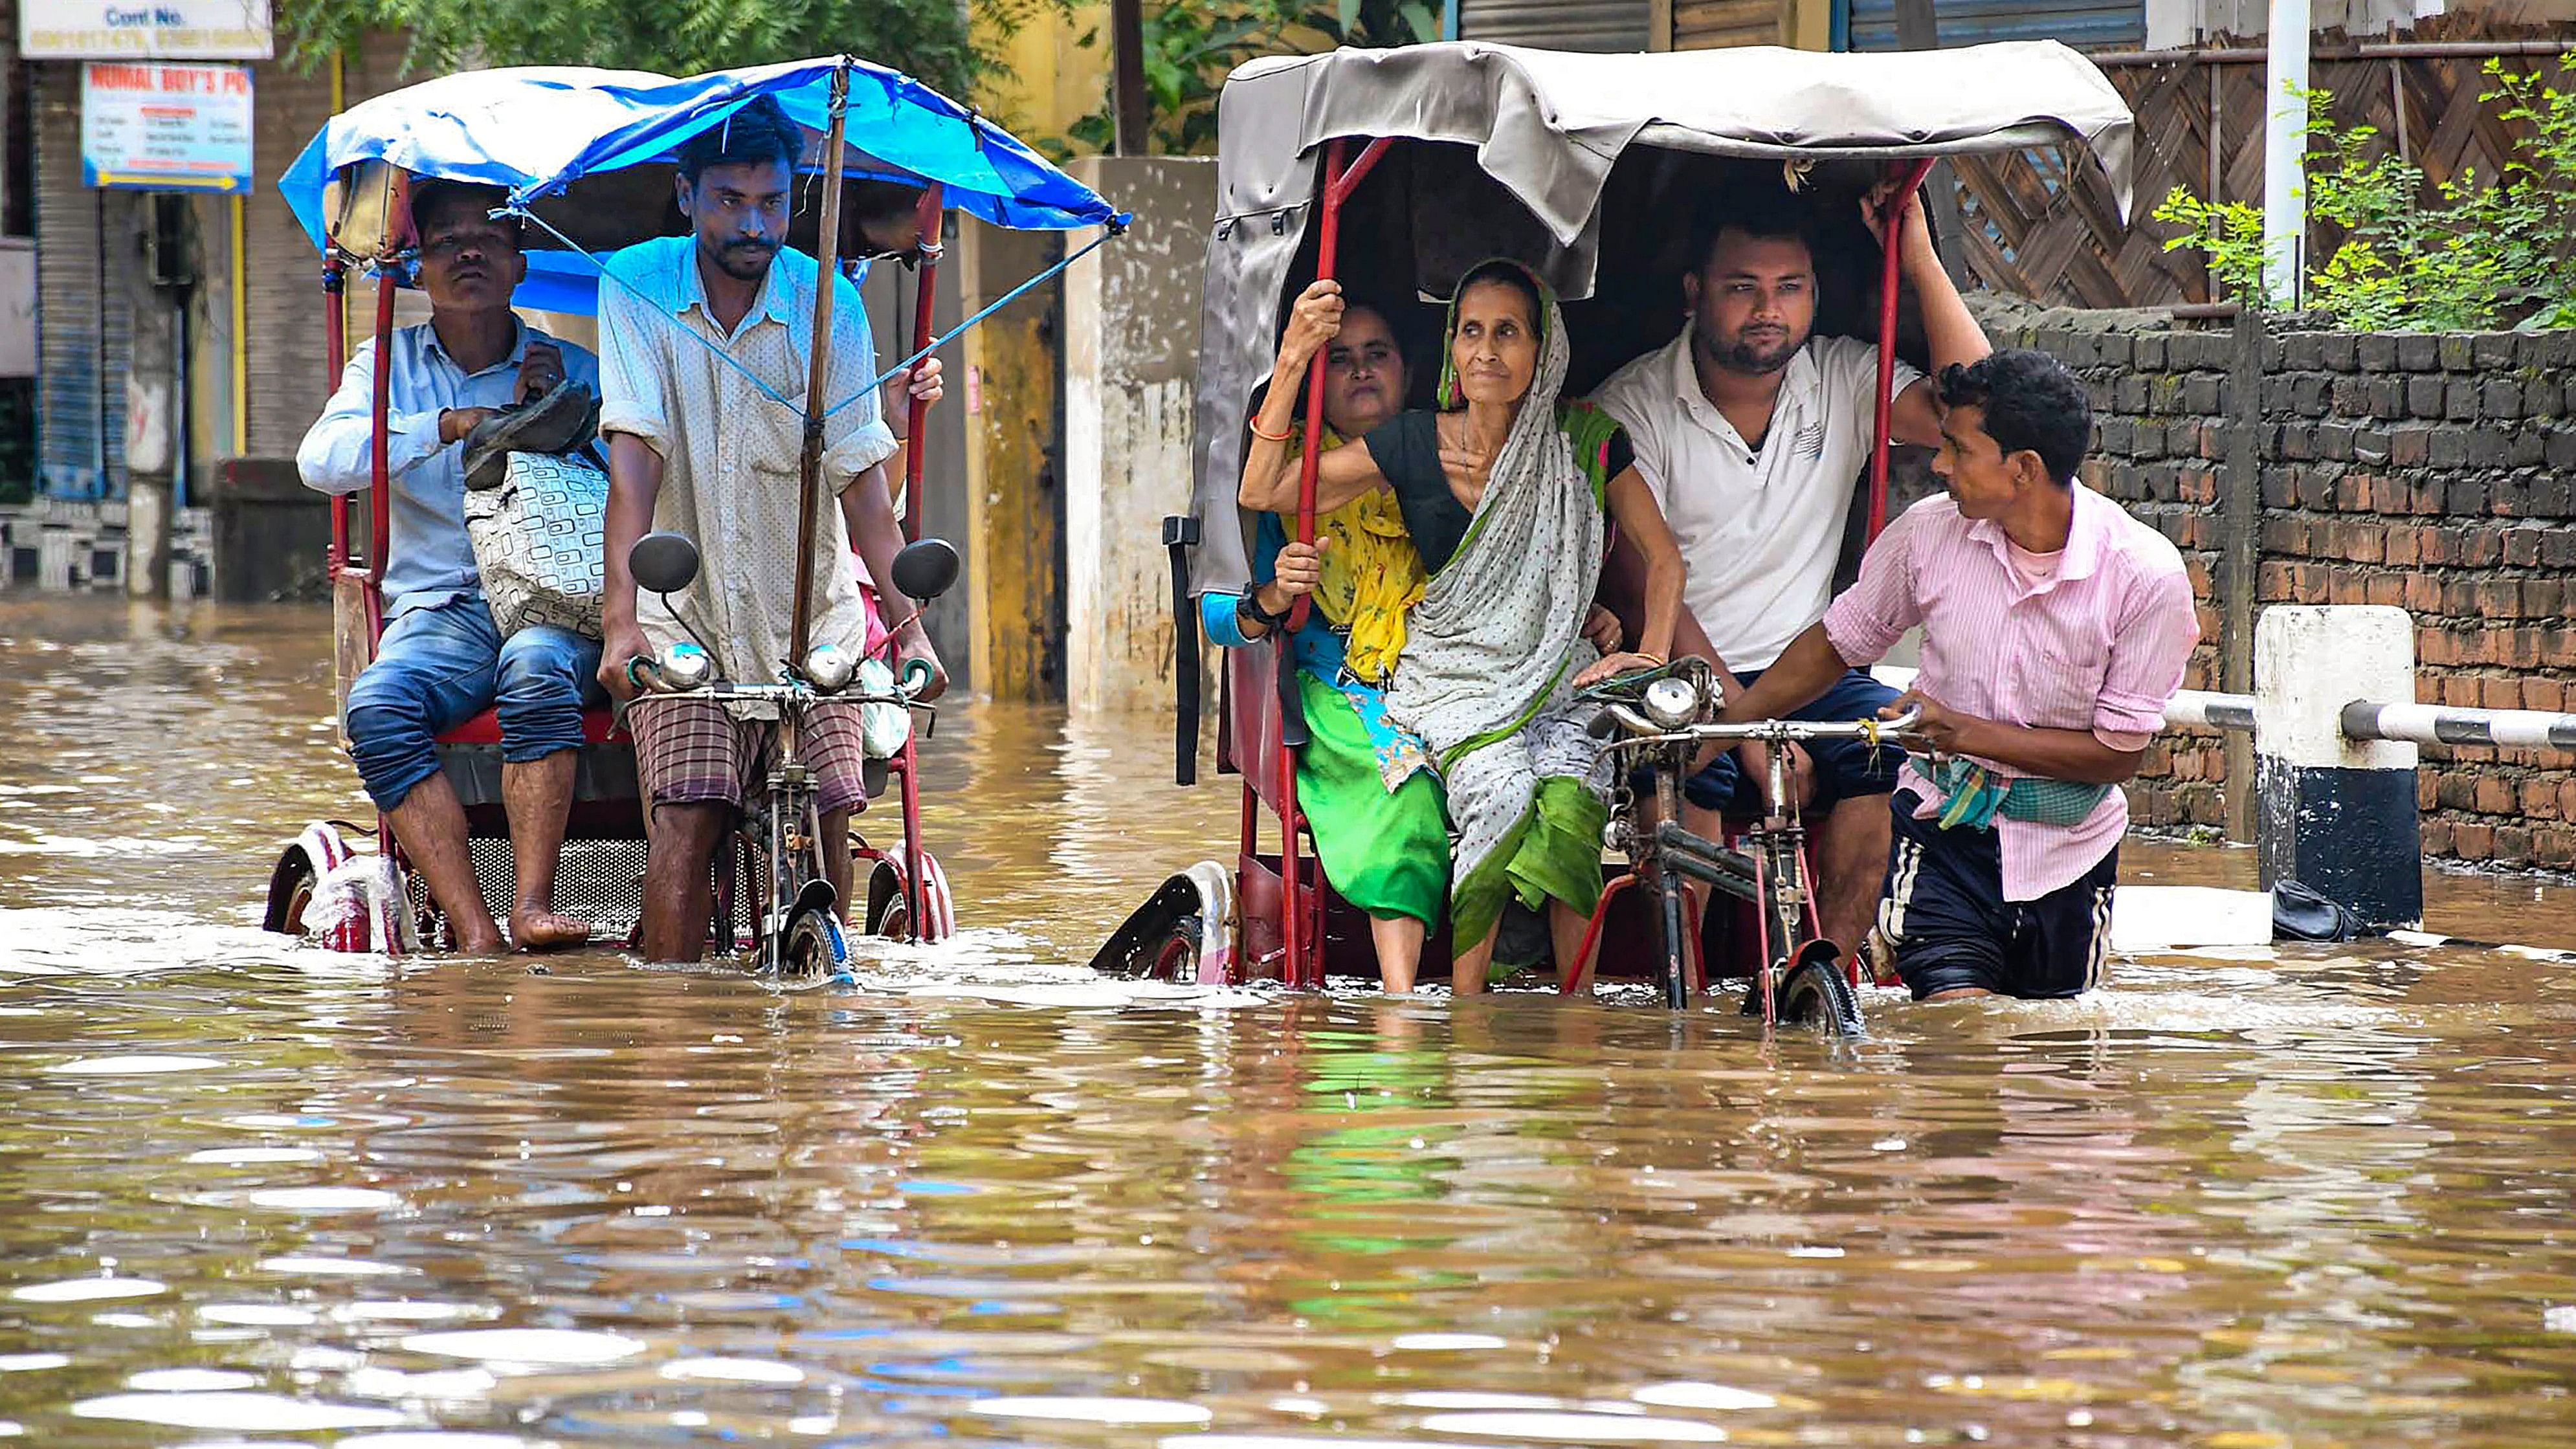 The flood situation in Assam improved on Wednesday although one more person lost his life due to drowning, while nearly 2.5 lakh people were still reeling under the deluge across eight districts.